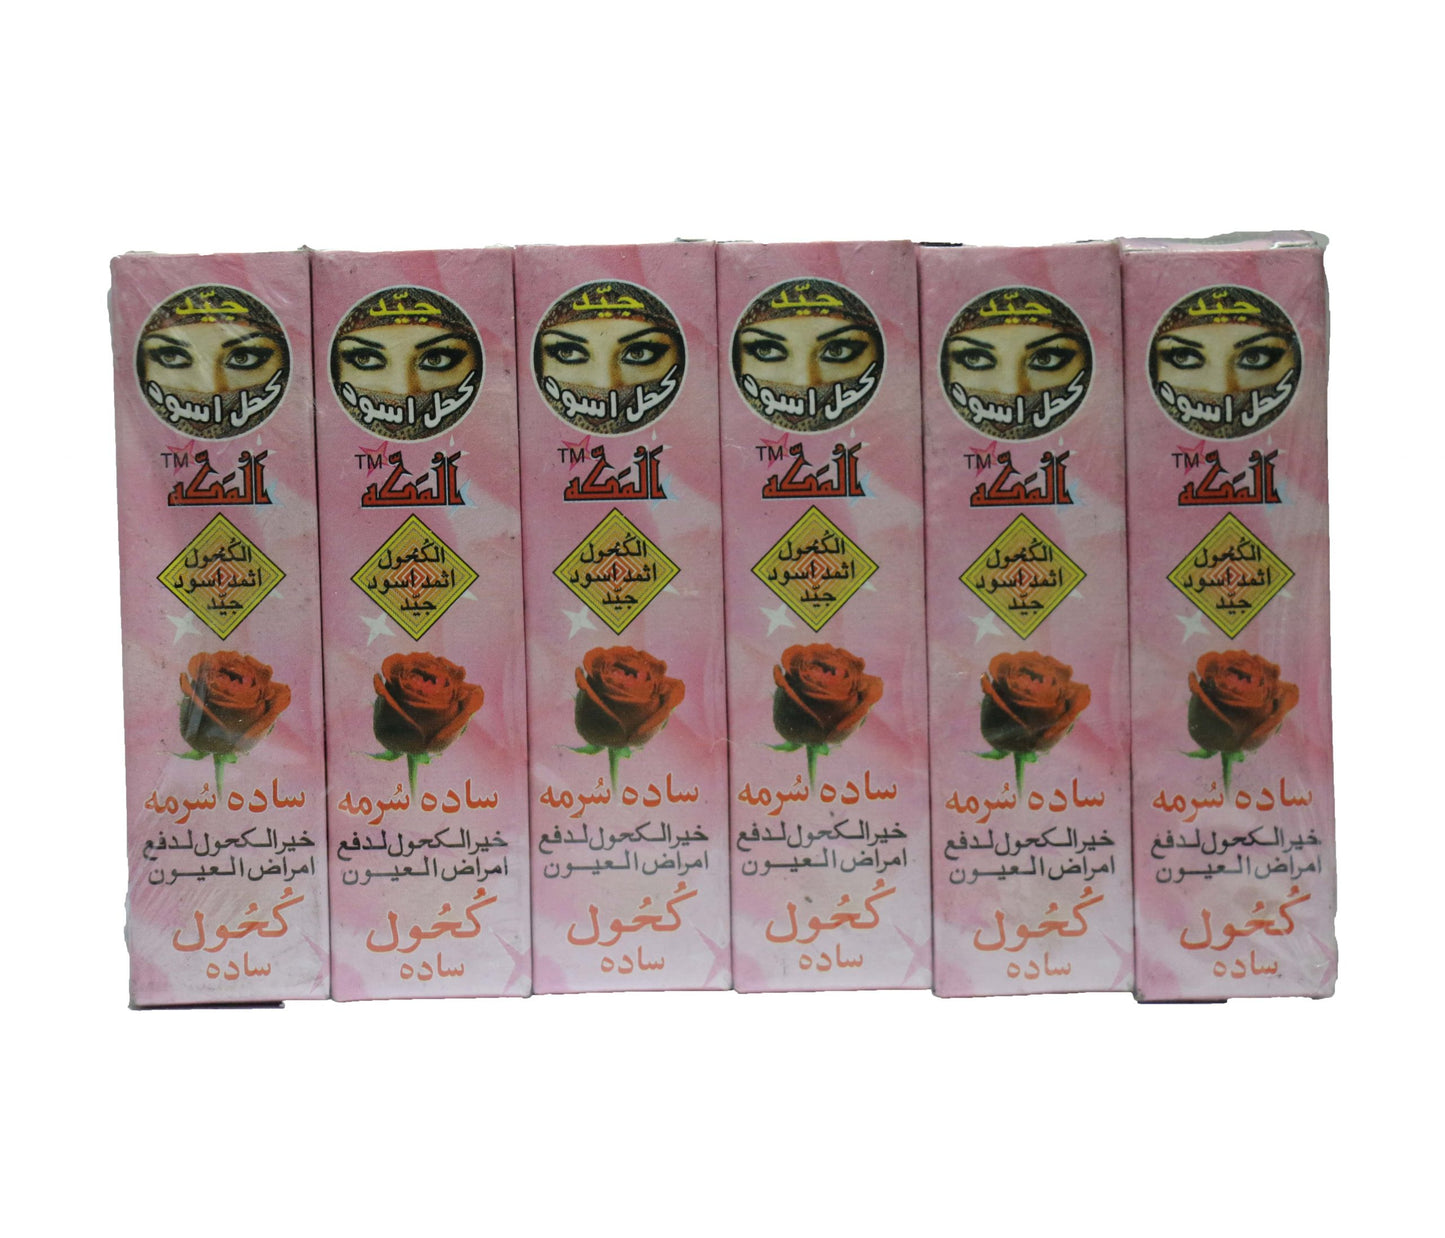 AL MAKKAH SADA SURMA WITH ROSE ASLI KOHL TOOR ONLY TO BE SOLD WITHIN INDIA